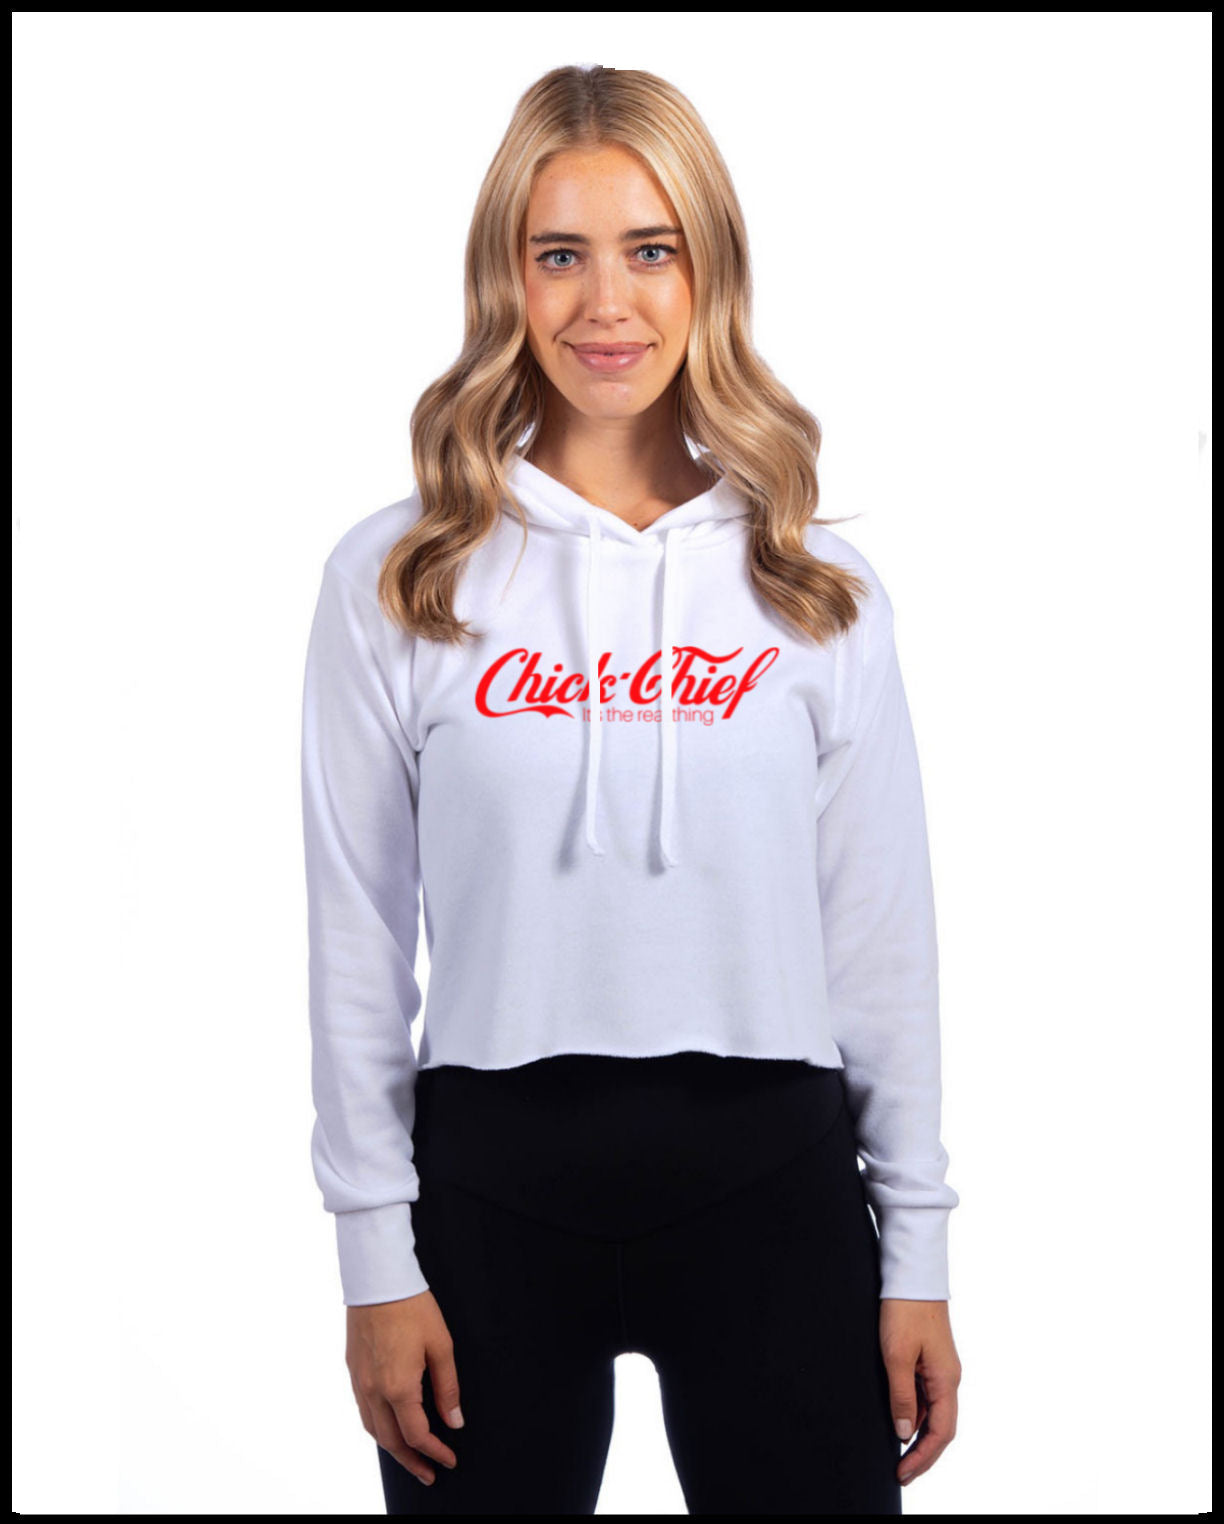 Chick Chief White & Red Crop Top Hooded Sweatshirt